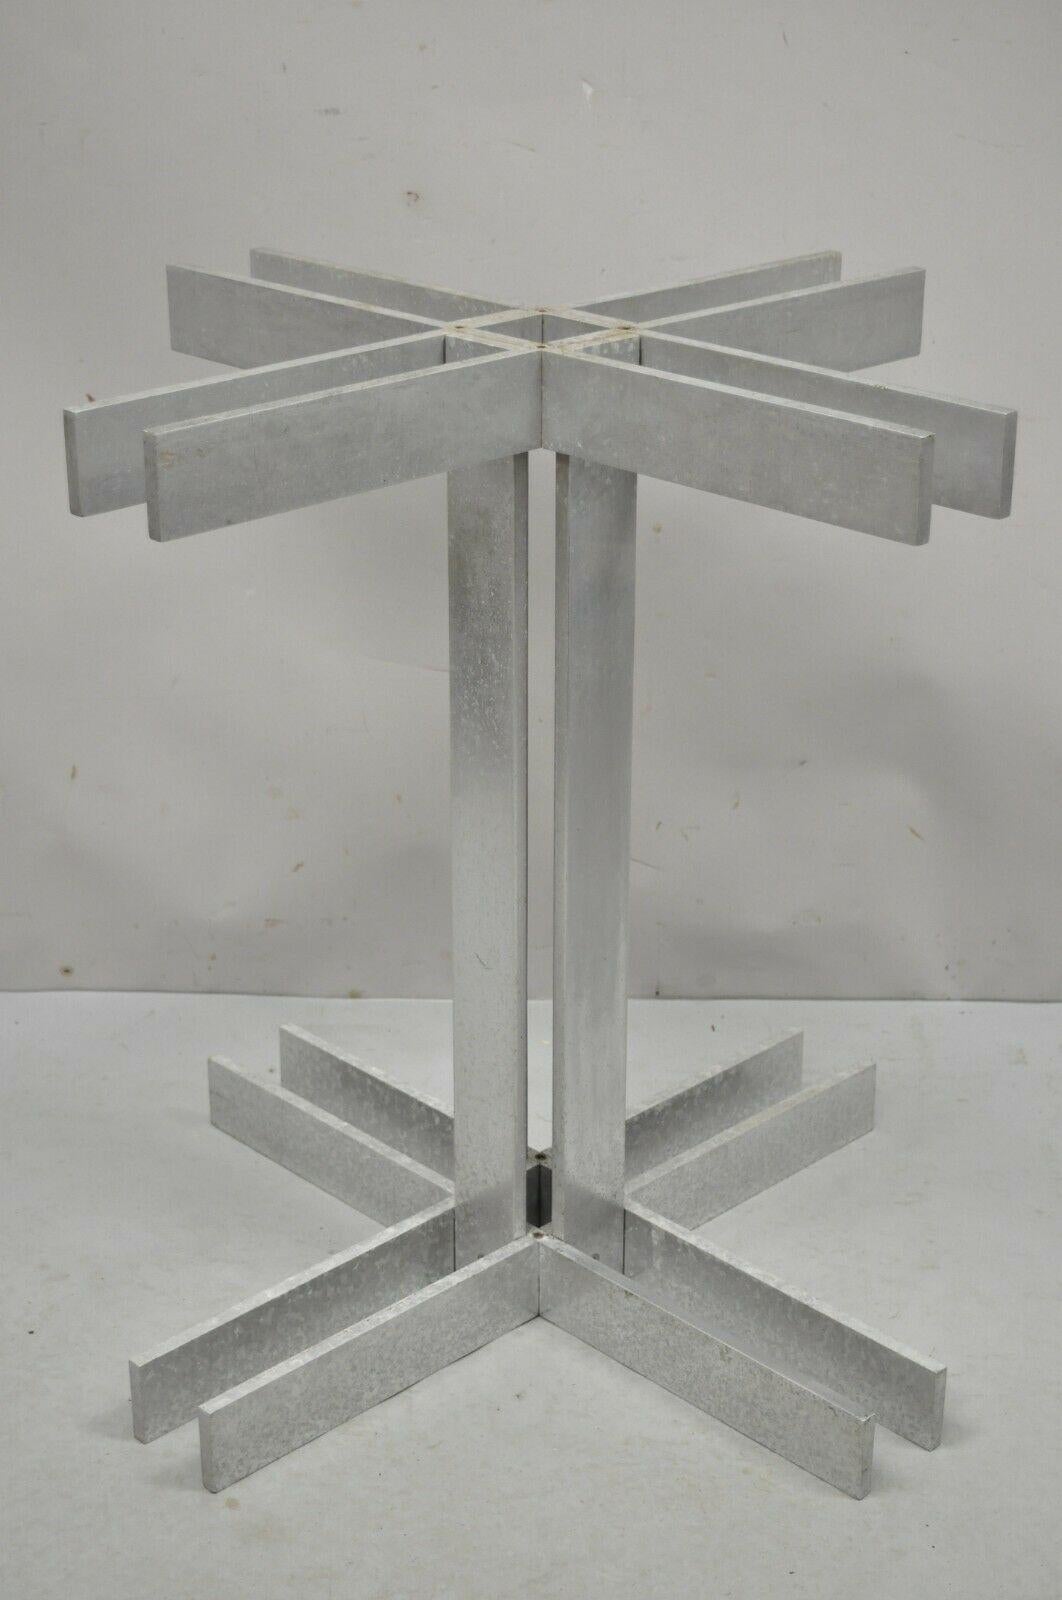 Vintage Mid-Century Modern aluminum metal geometric pedestal table base - no top. Item features sleek geometric design, cast aluminum construction, very nice vintage item, clean modernist lines, quality American craftsmanship, great style and form,